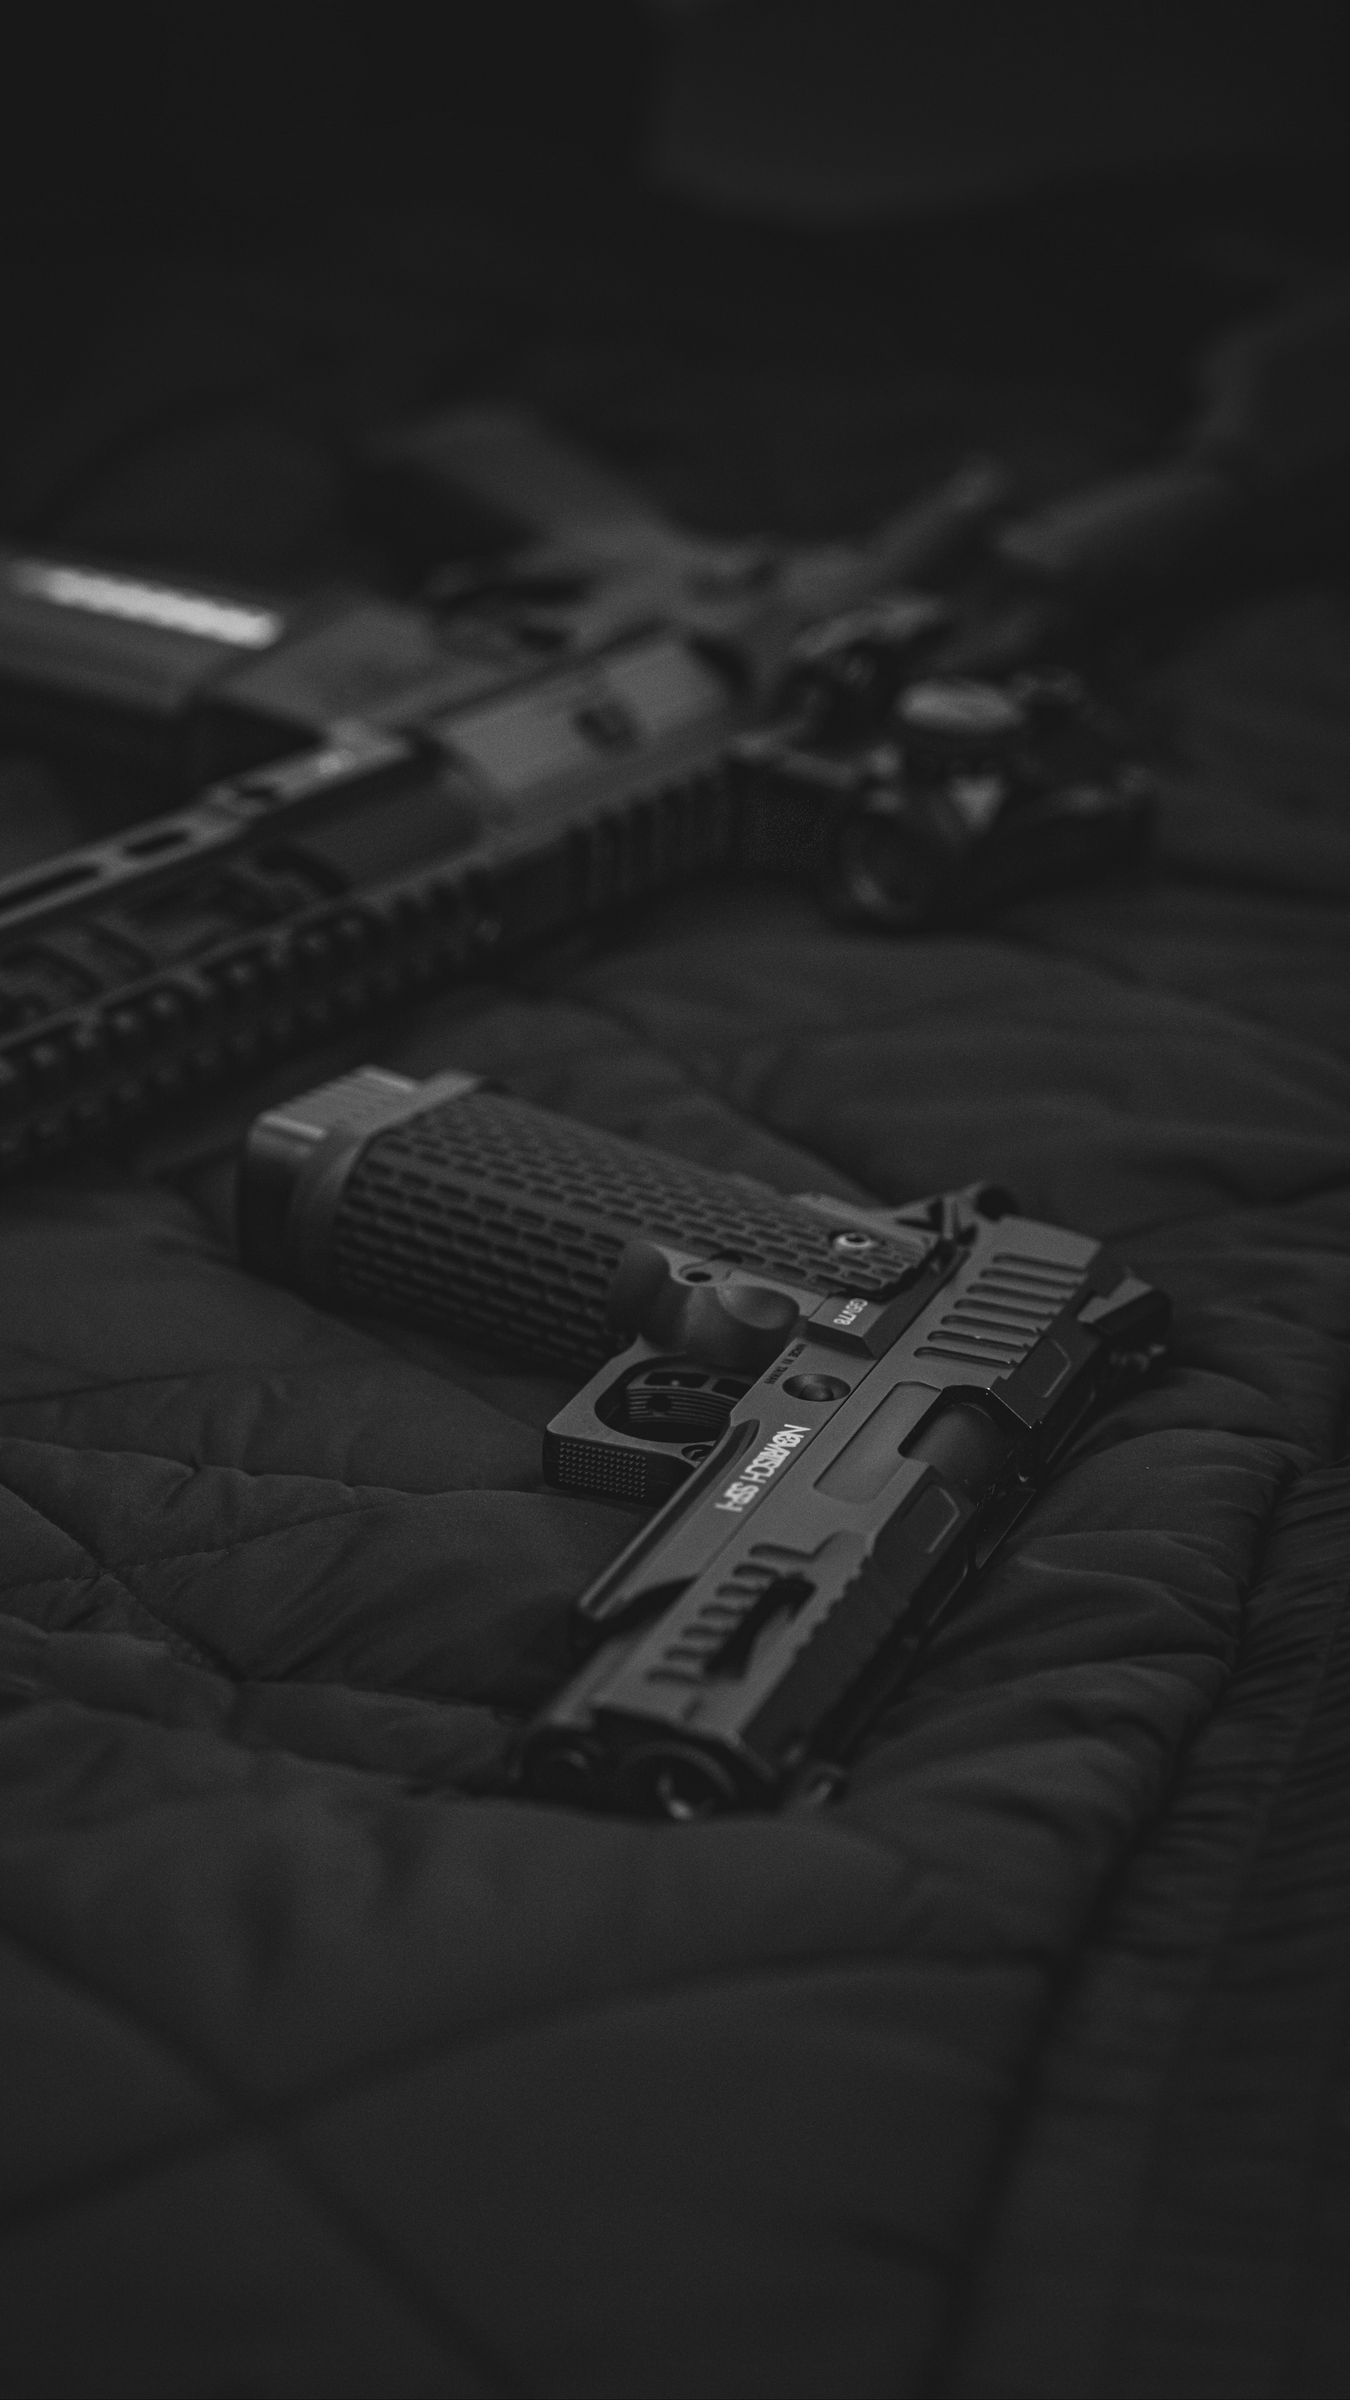 Download wallpaper 1350x2400 rifle gun weapon black iphone 876s6  for parallax hd background